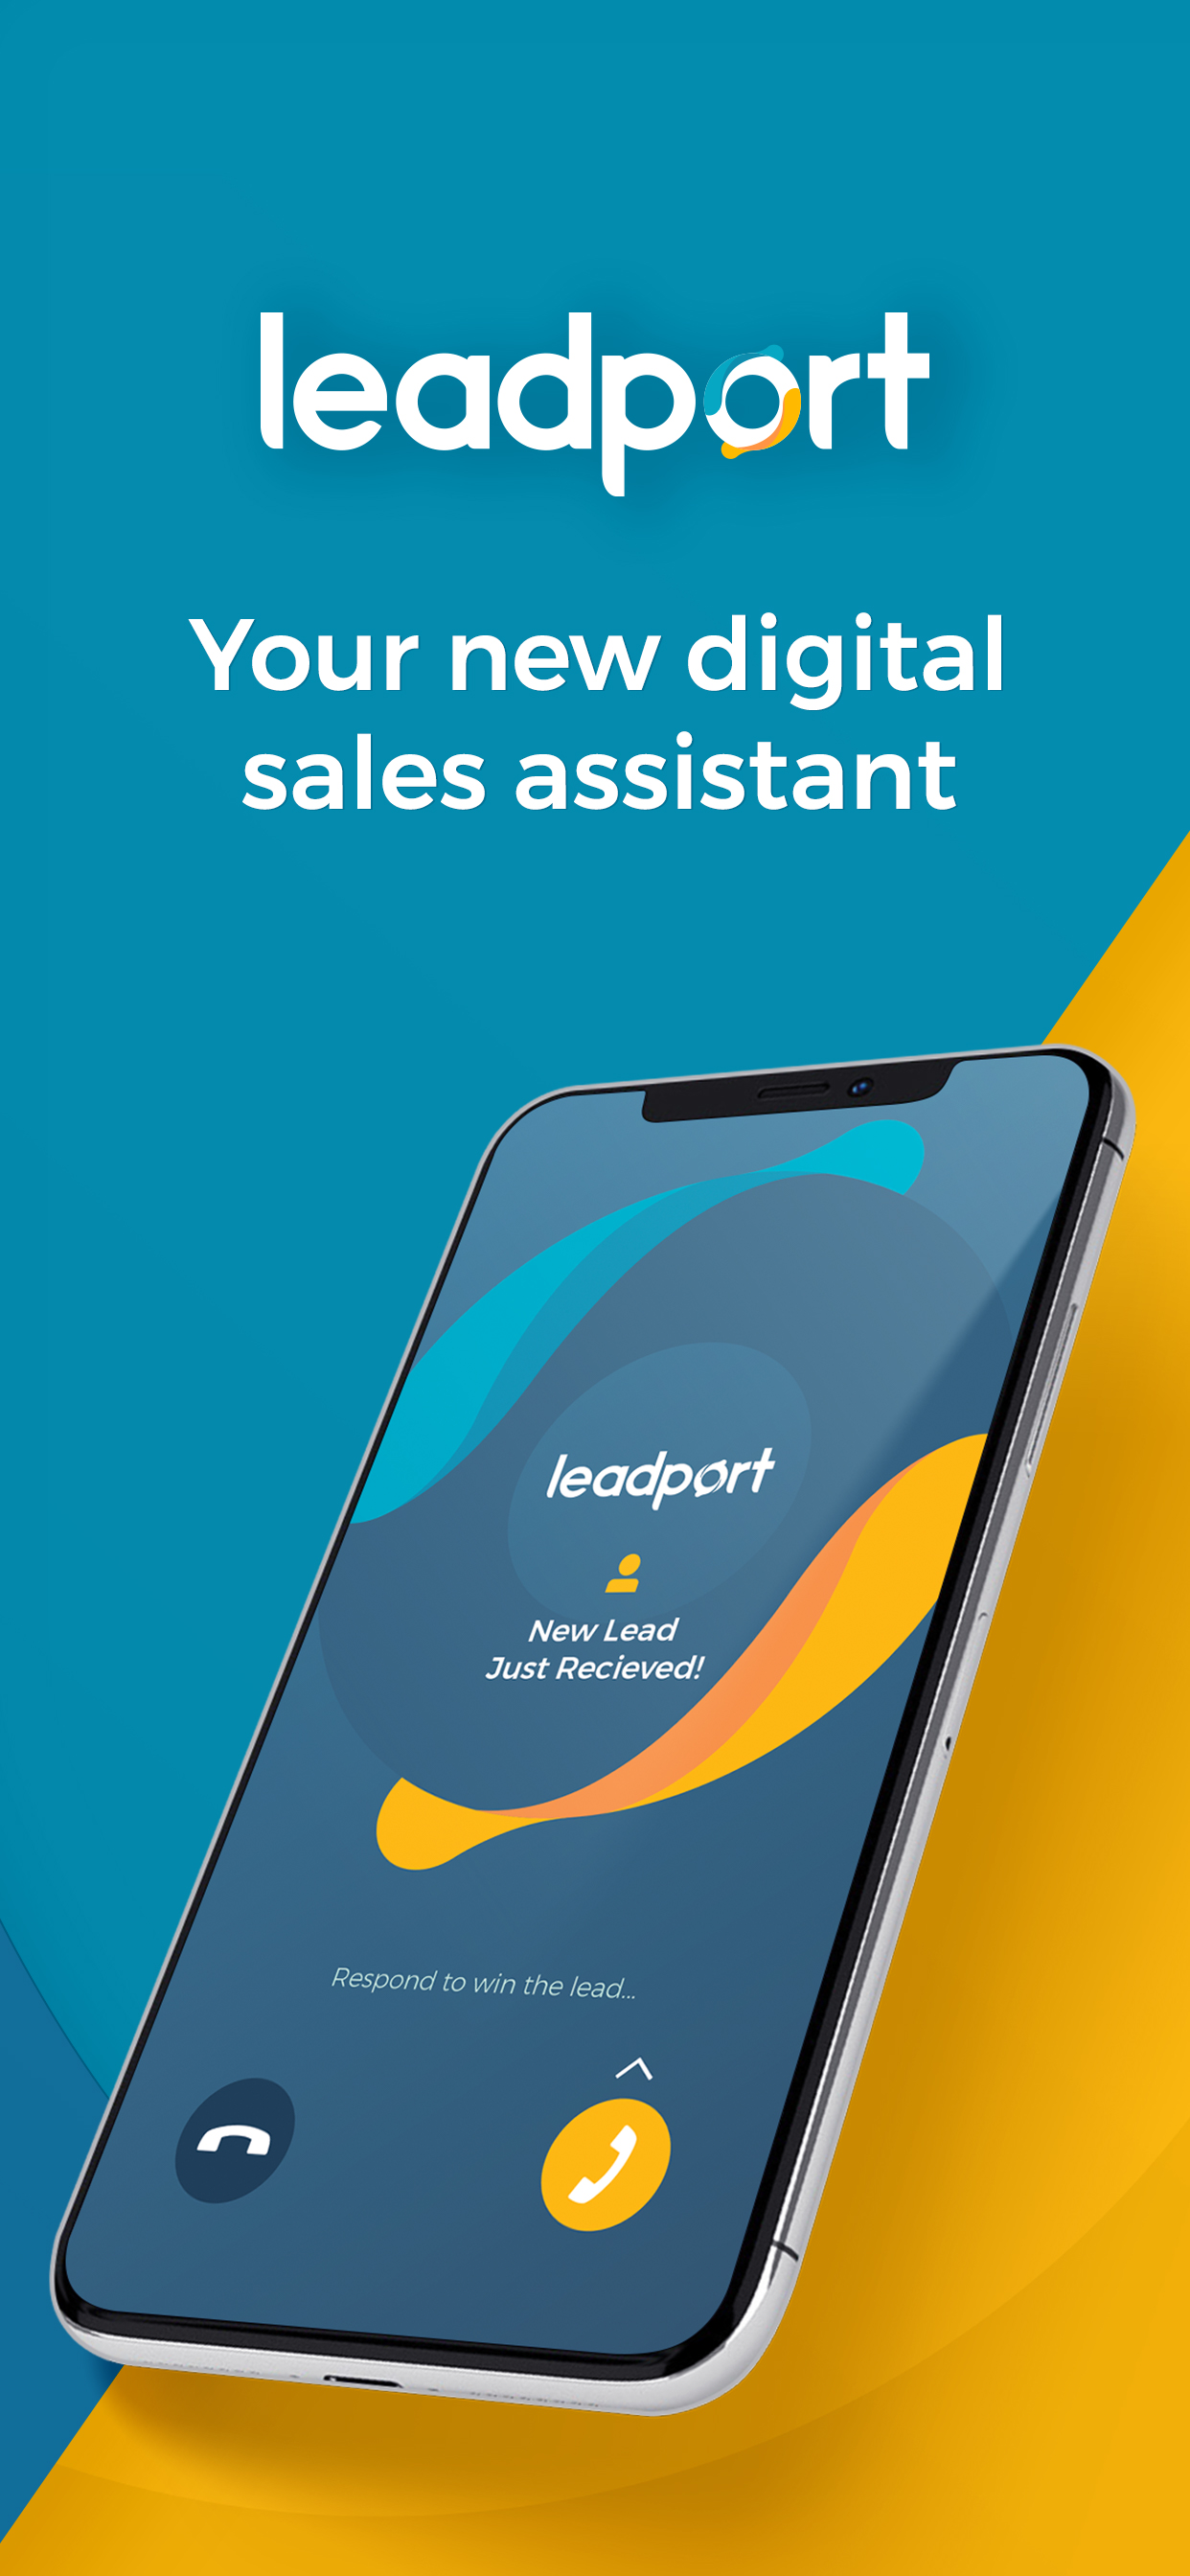 Introducing Leadport: Your Gateway to Digital Sales Excellence